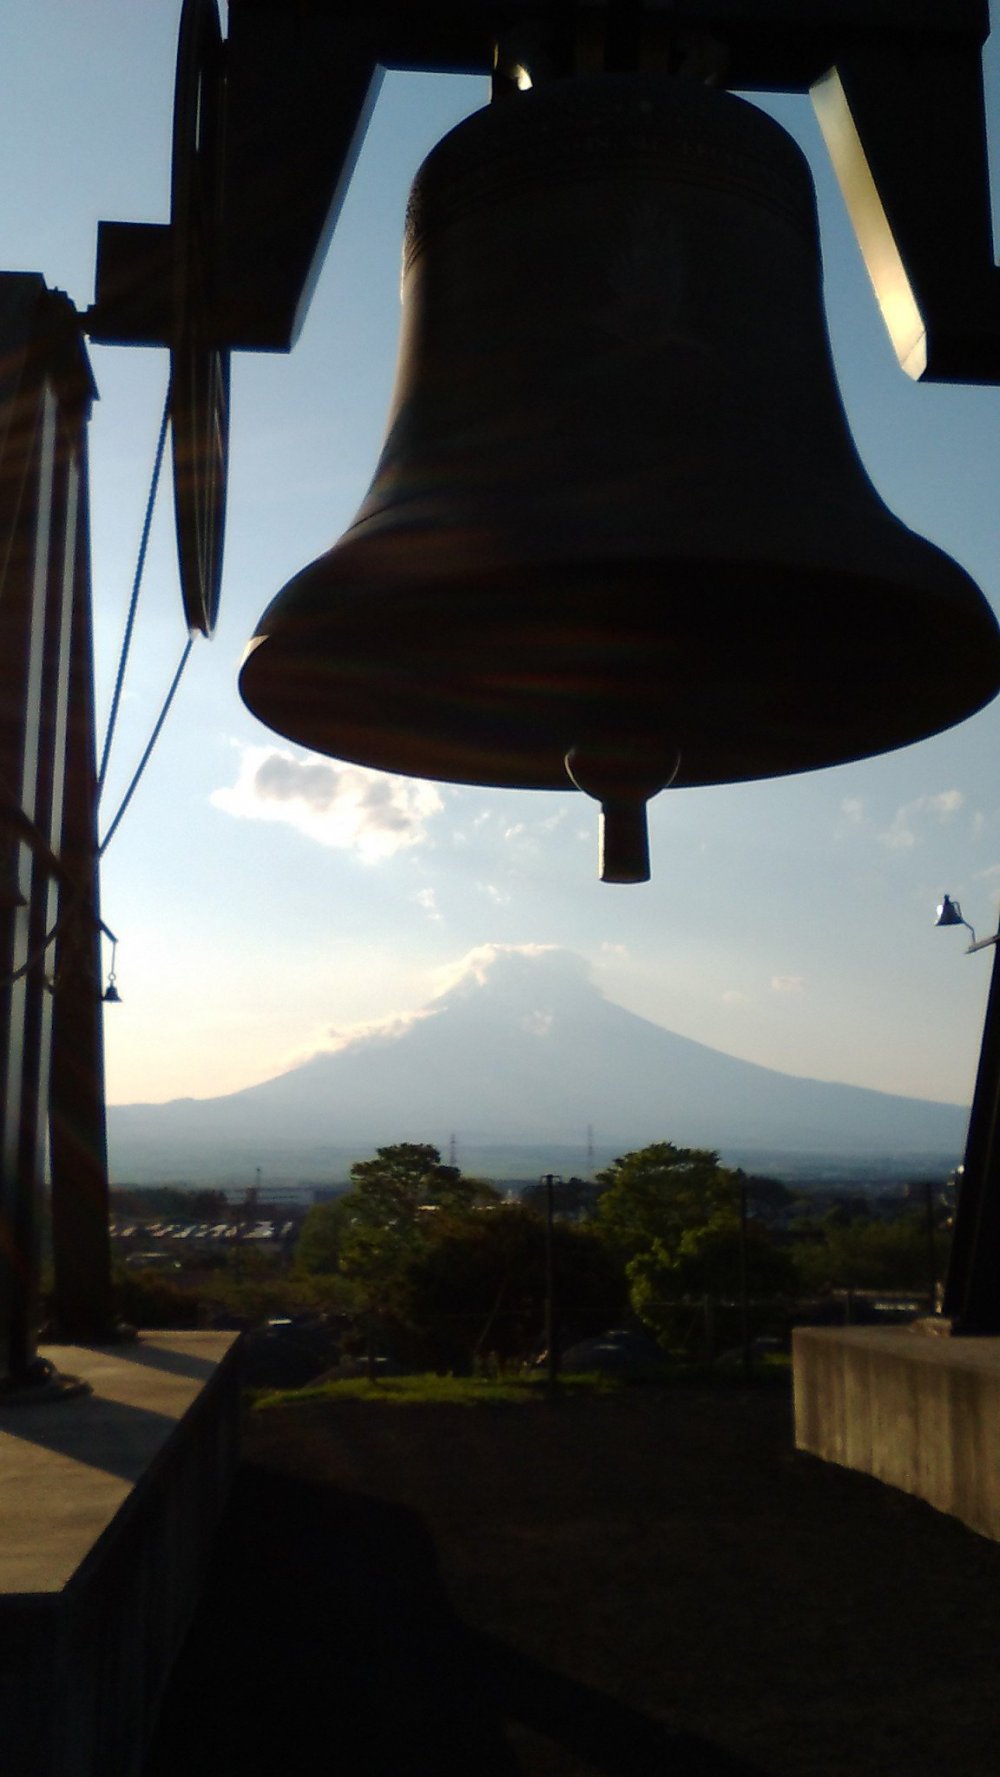 Tokinosumika is home to the third heaviest bell in Japan. You can see Mt Fuji under the bell.